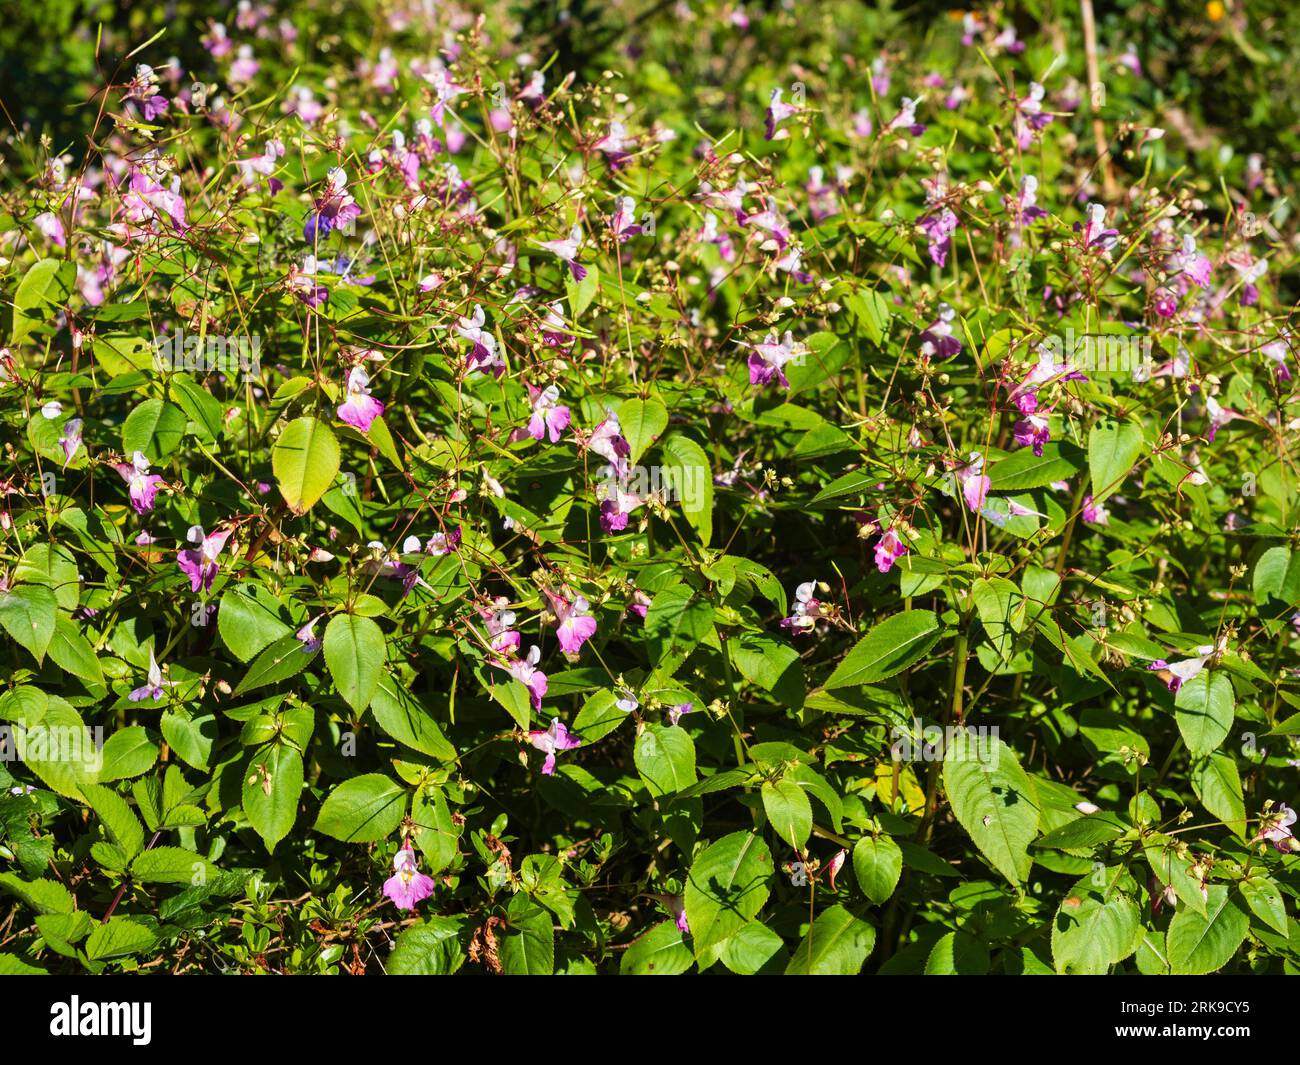 Thicket of the hardy busy lizzie, Impatiens arguta, flowering in late summer Stock Photo